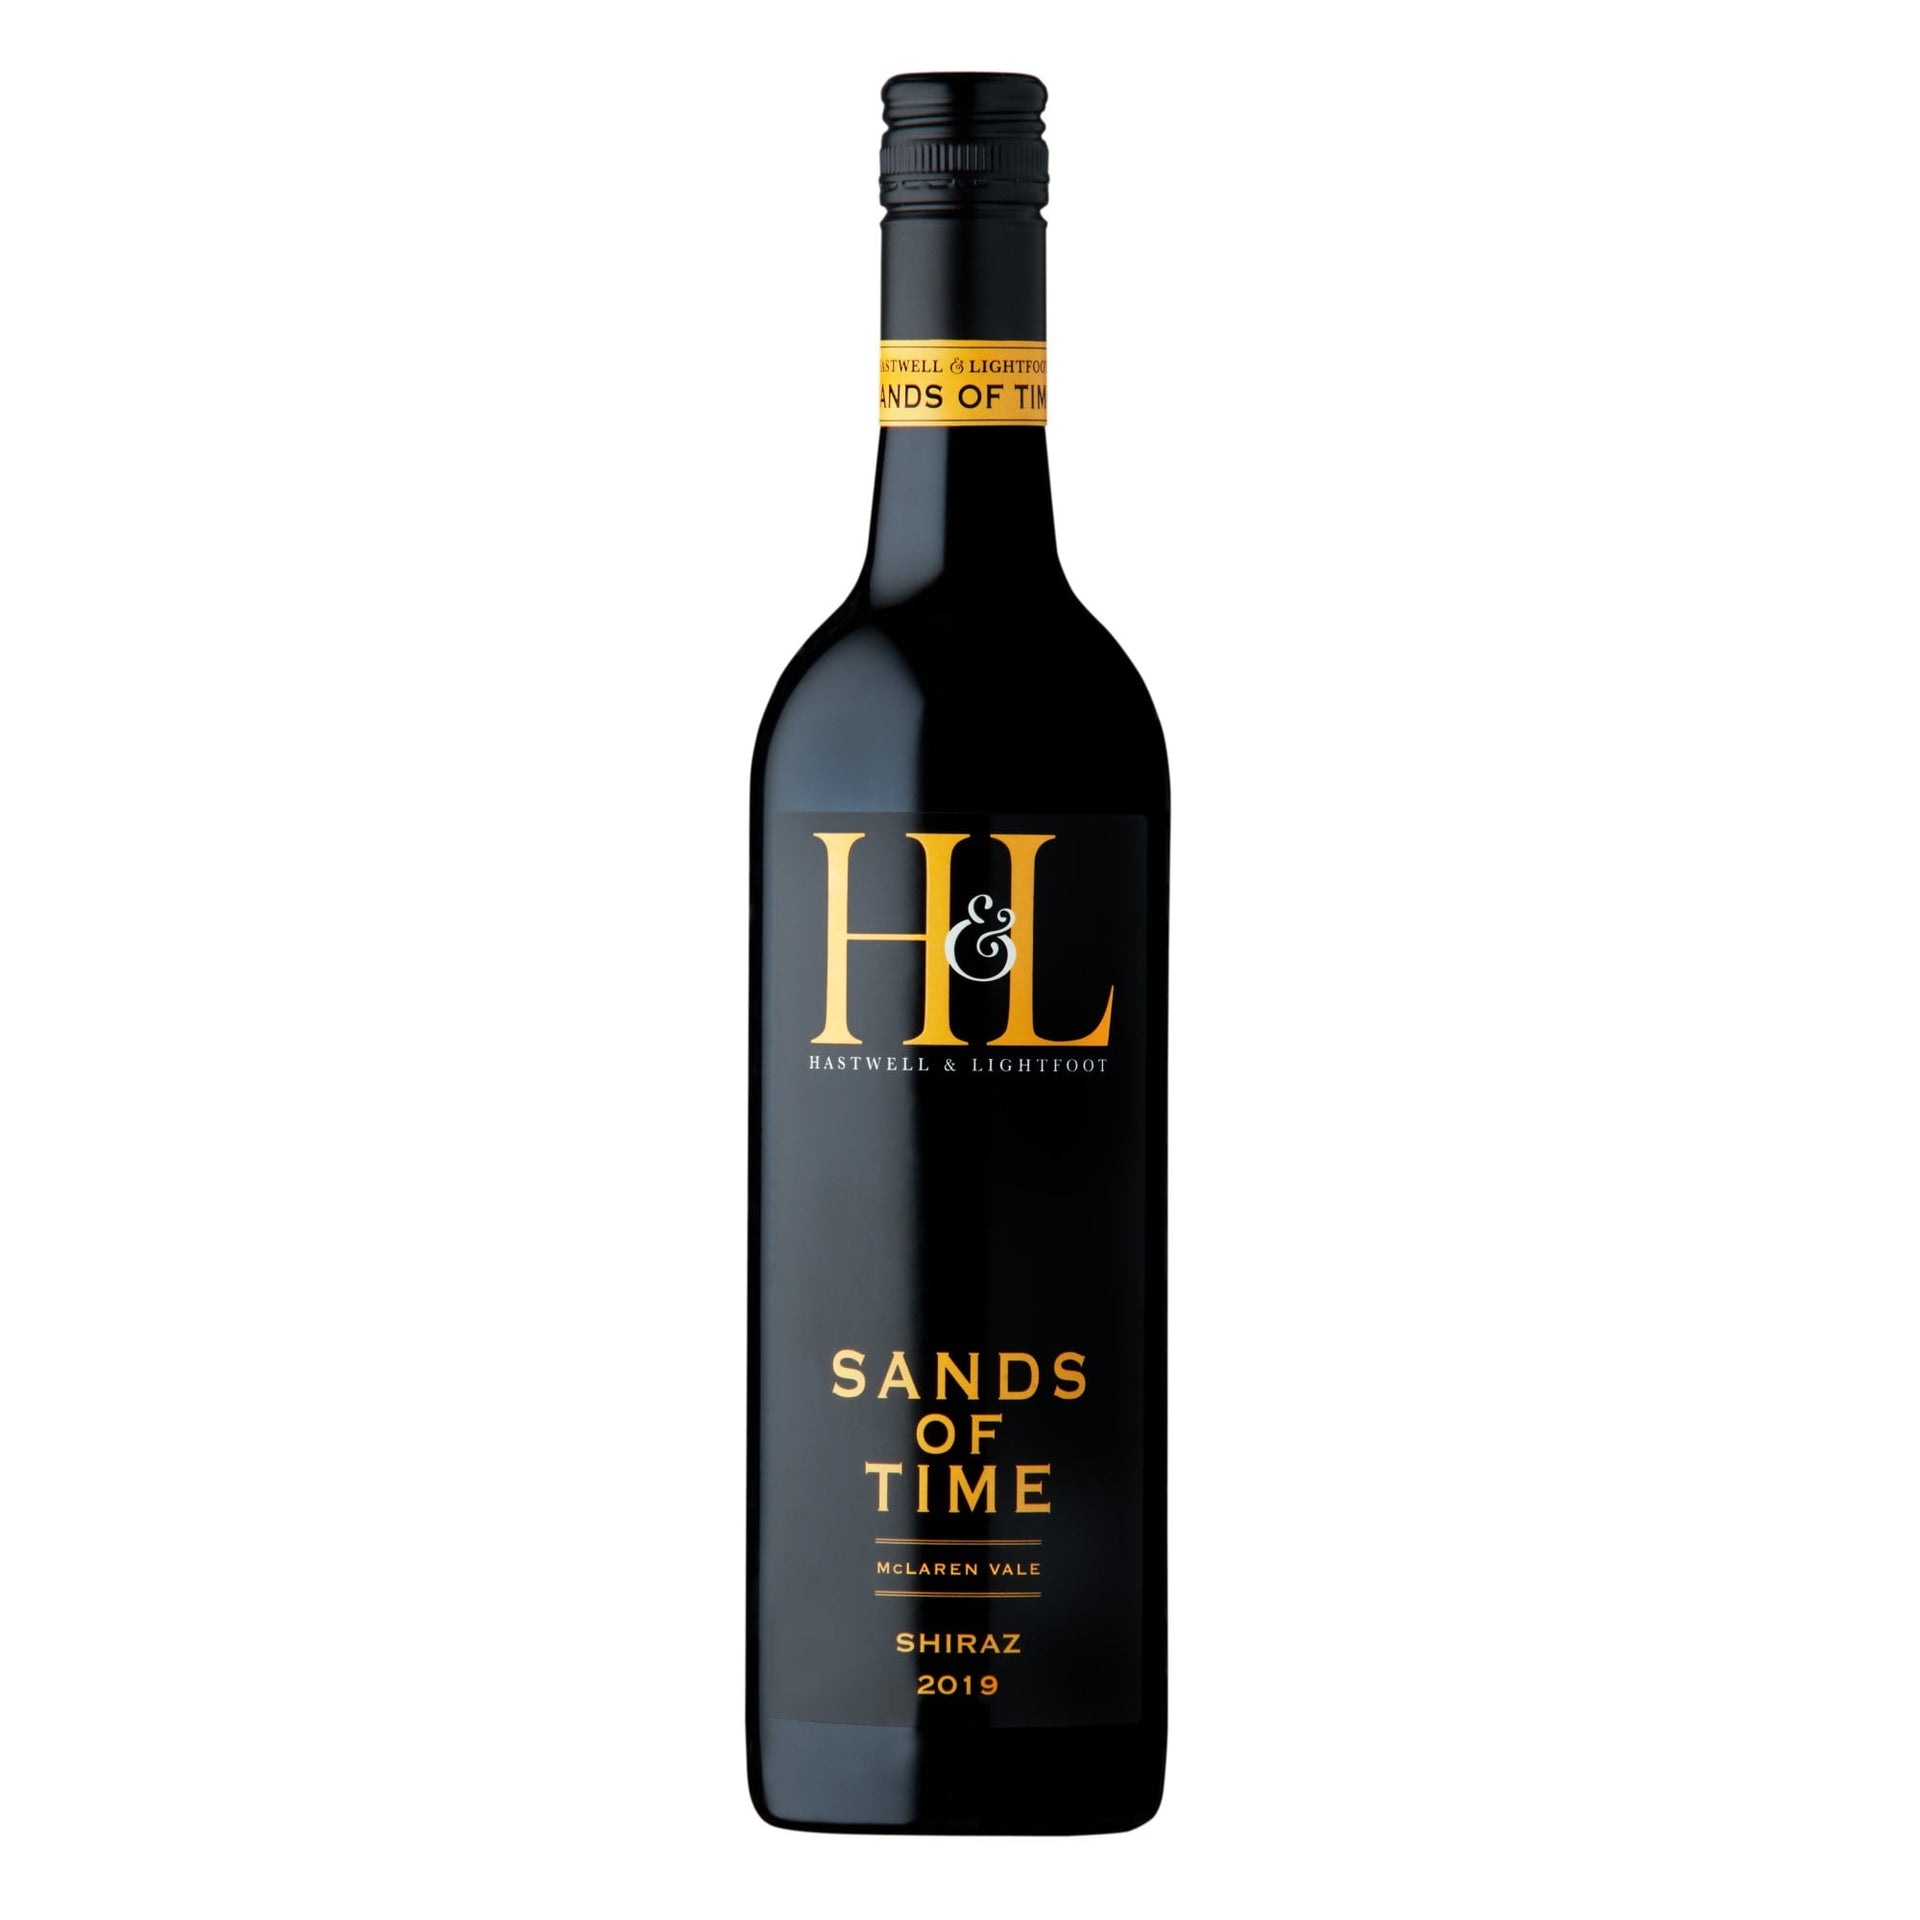 Sands of Time Wine Shiraz Lightfoot & 2019 Hastwell – 